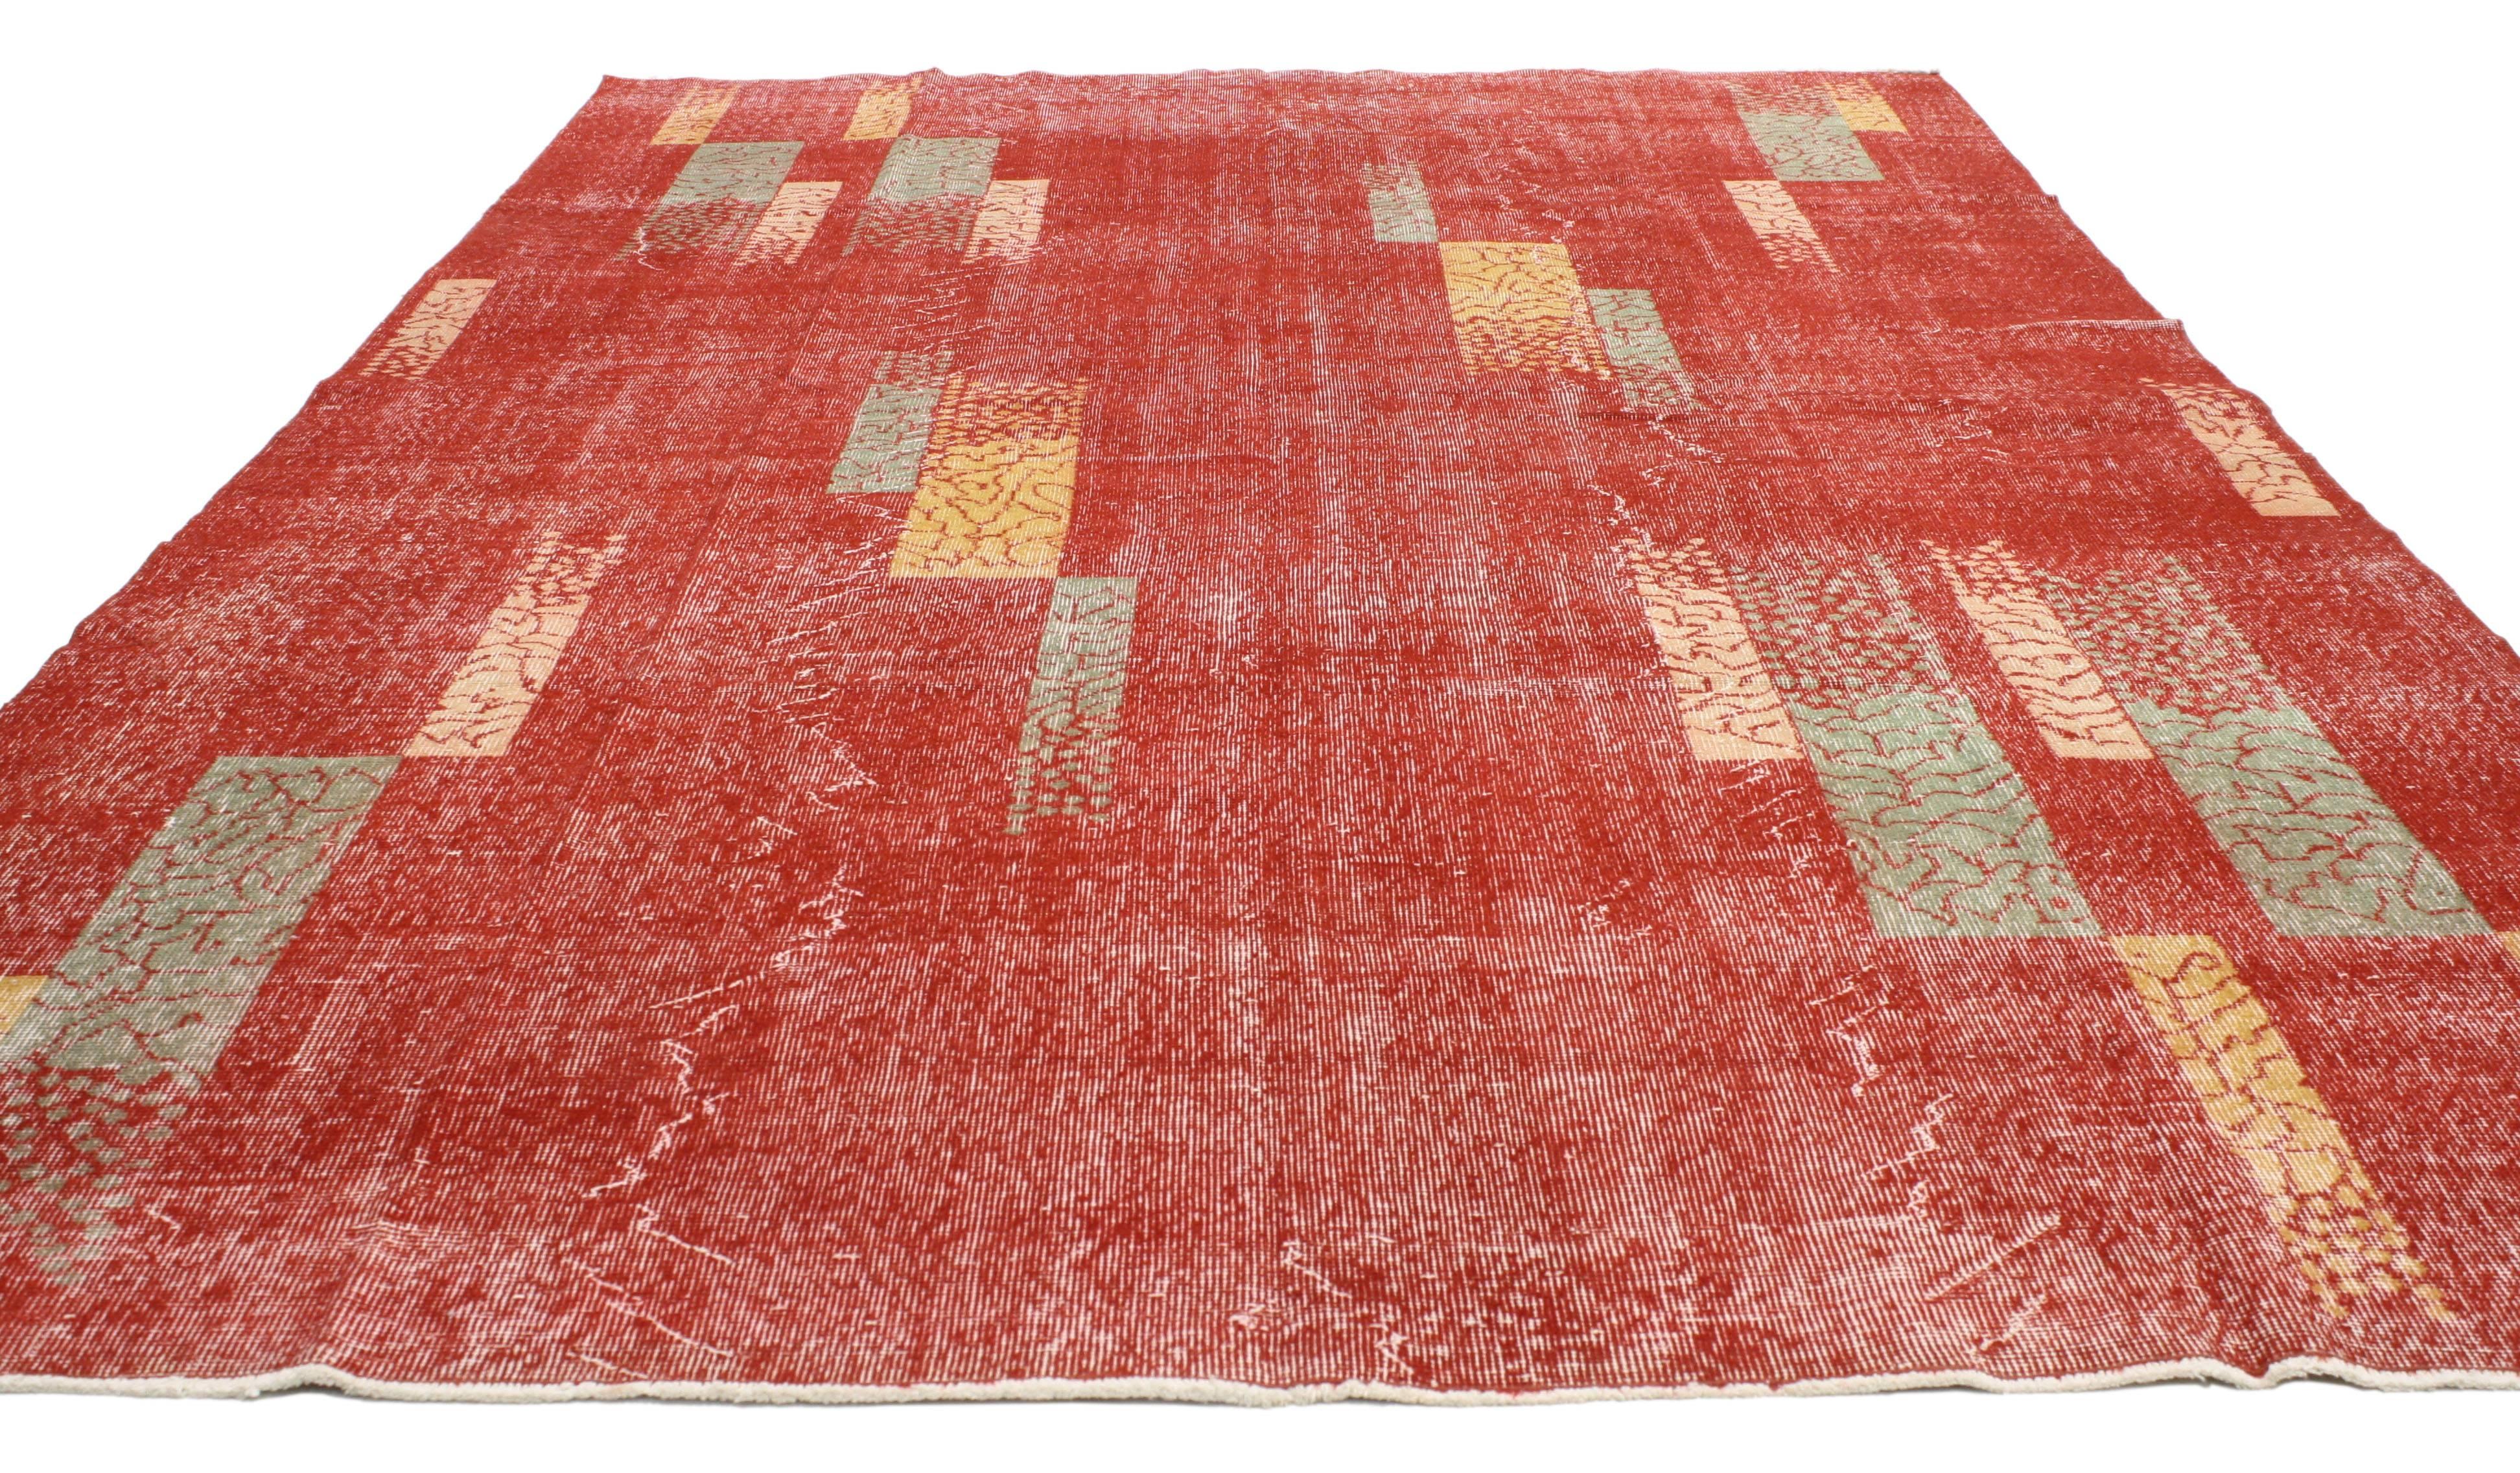 ​52188 Zeki Muren Distressed Vintage Turkish Sivas Rug with Cubist Style and Art Deco Vibes 06'06 x 10'07. ​​With its geometric pattern, bold form and vibrant colors, this hand knotted wool distressed vintage Turkish Sivas rug beautifully highlights